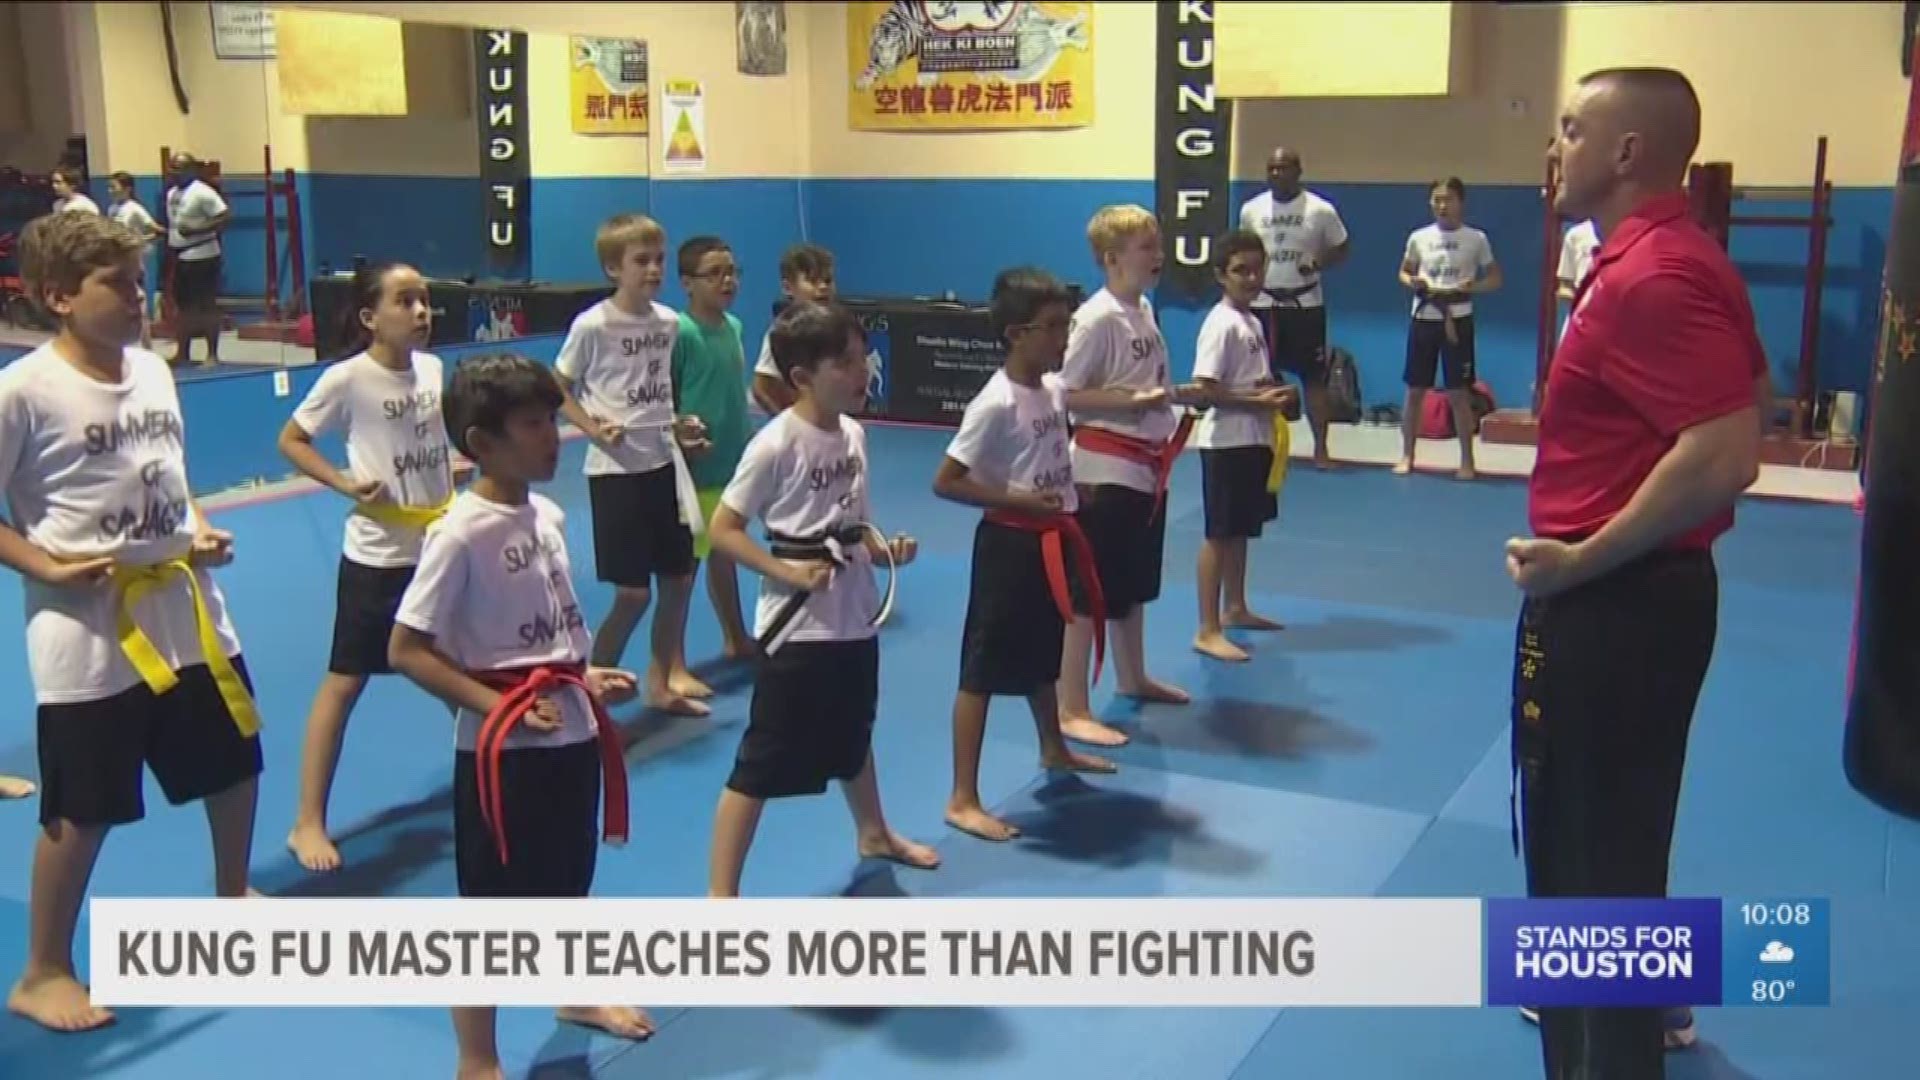 A Kung Fu master in Katy is teaching kids much more than how to fight.